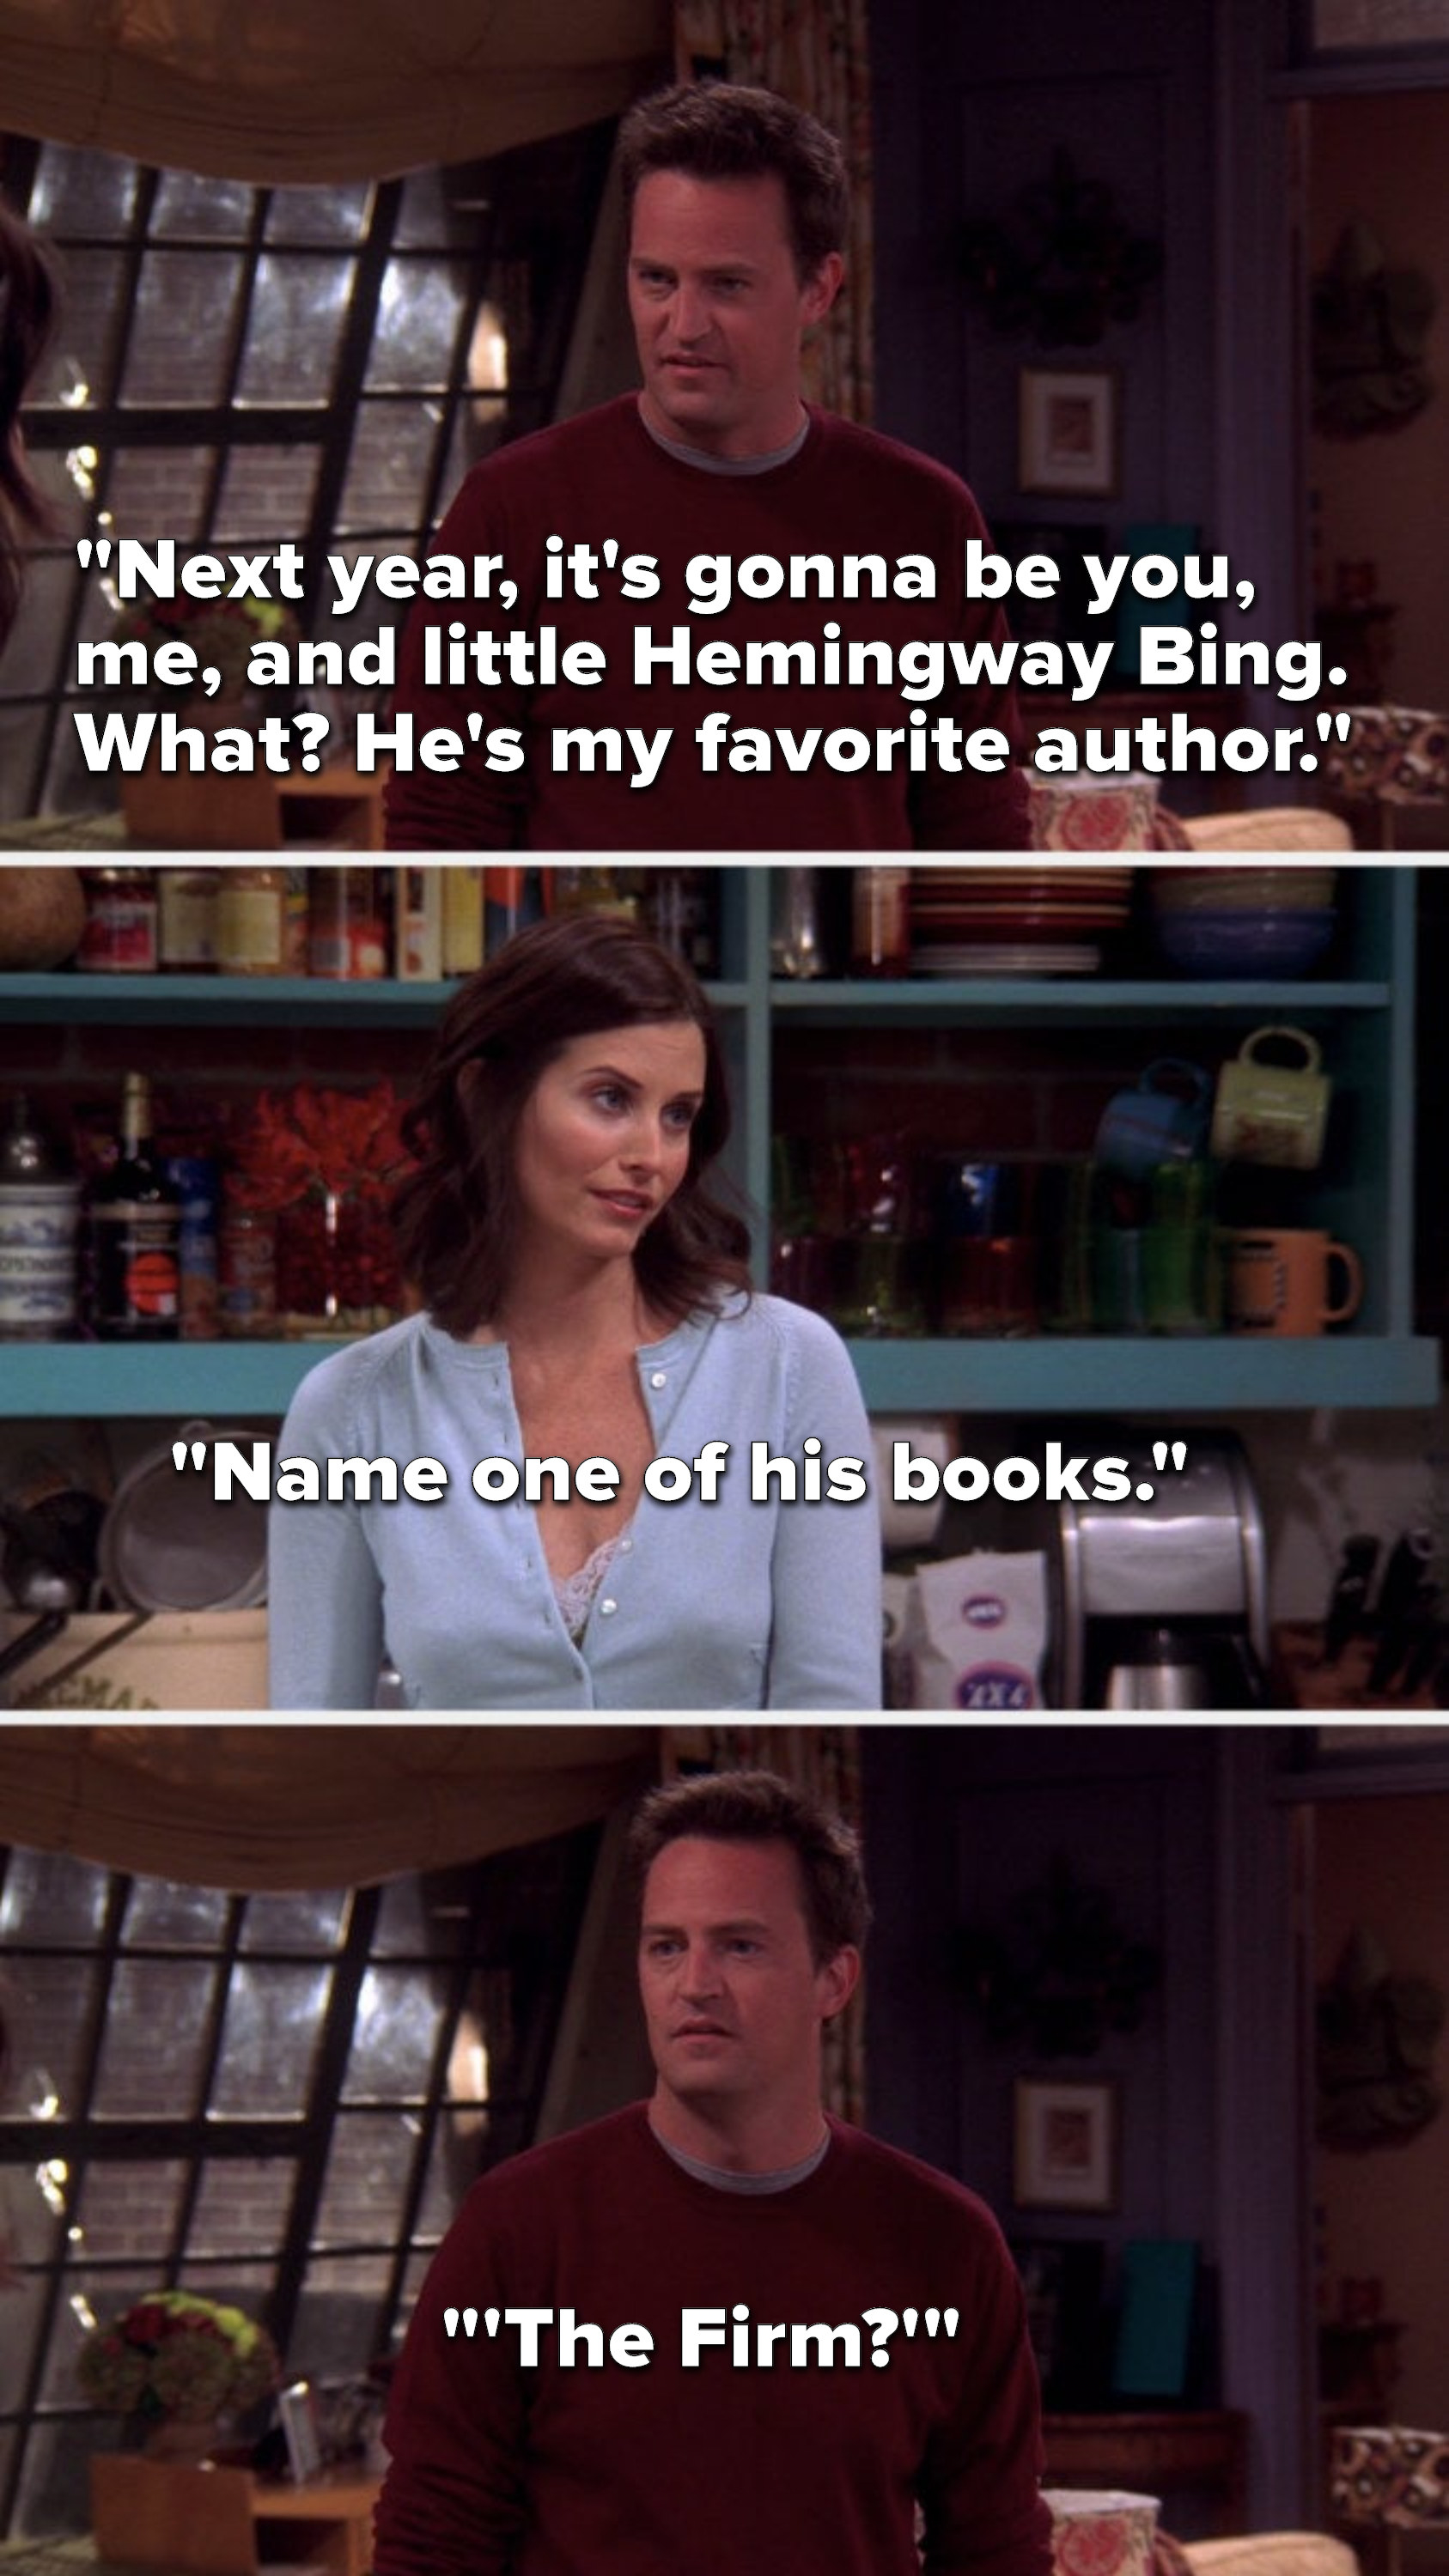 Chandler says, &quot;Next year, it&#x27;s gonna be you, me, and little Hemingway Bing...what, he&#x27;s my favorite author,&quot; Monica says, &quot;Name one of his books,&quot; and Chandler says, &quot;The Firm&quot;